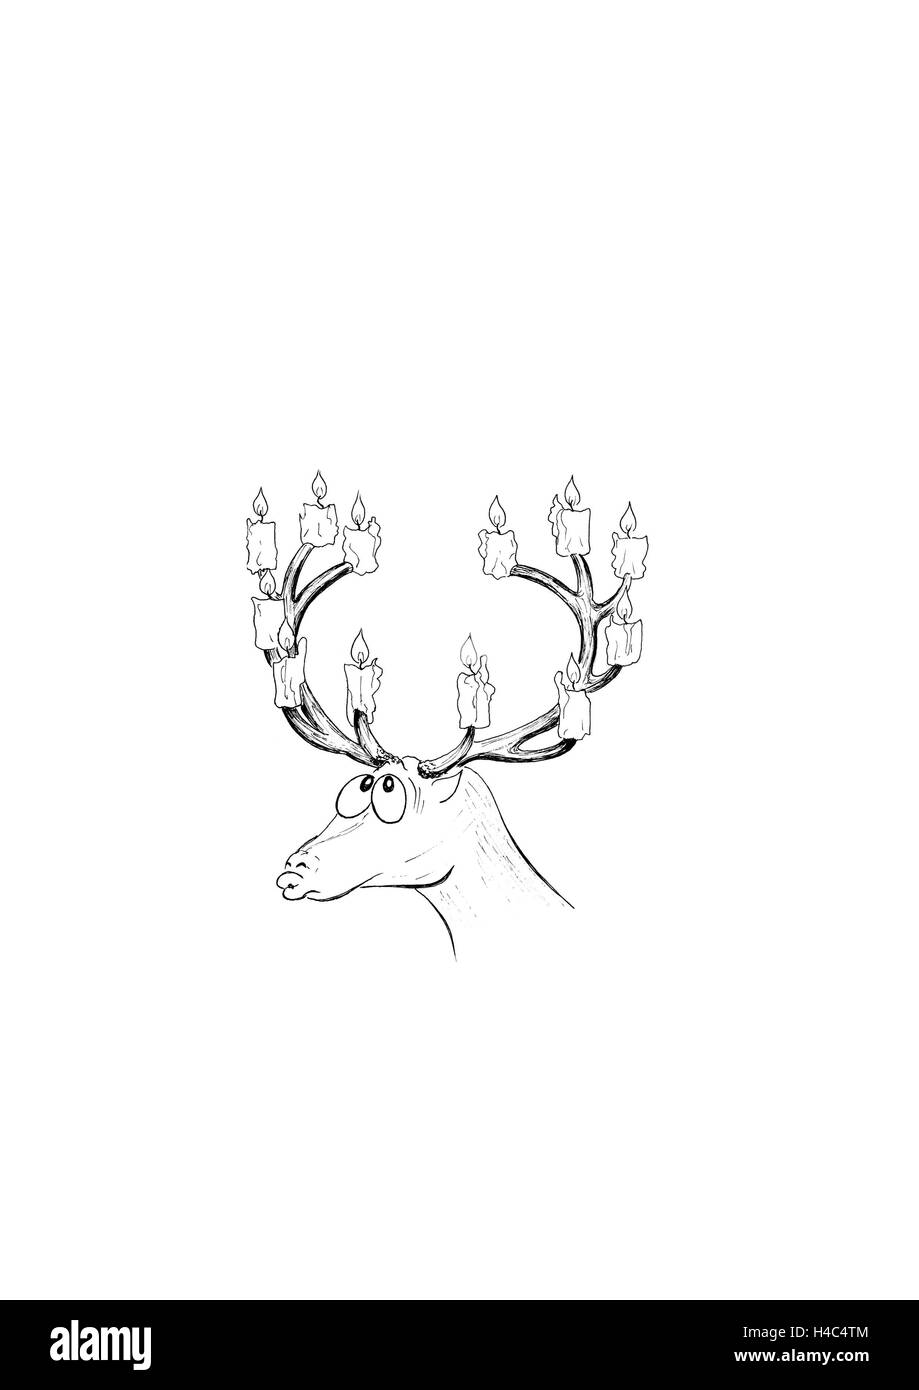 Twelve-pointer stag with candles on antlers Stock Photo